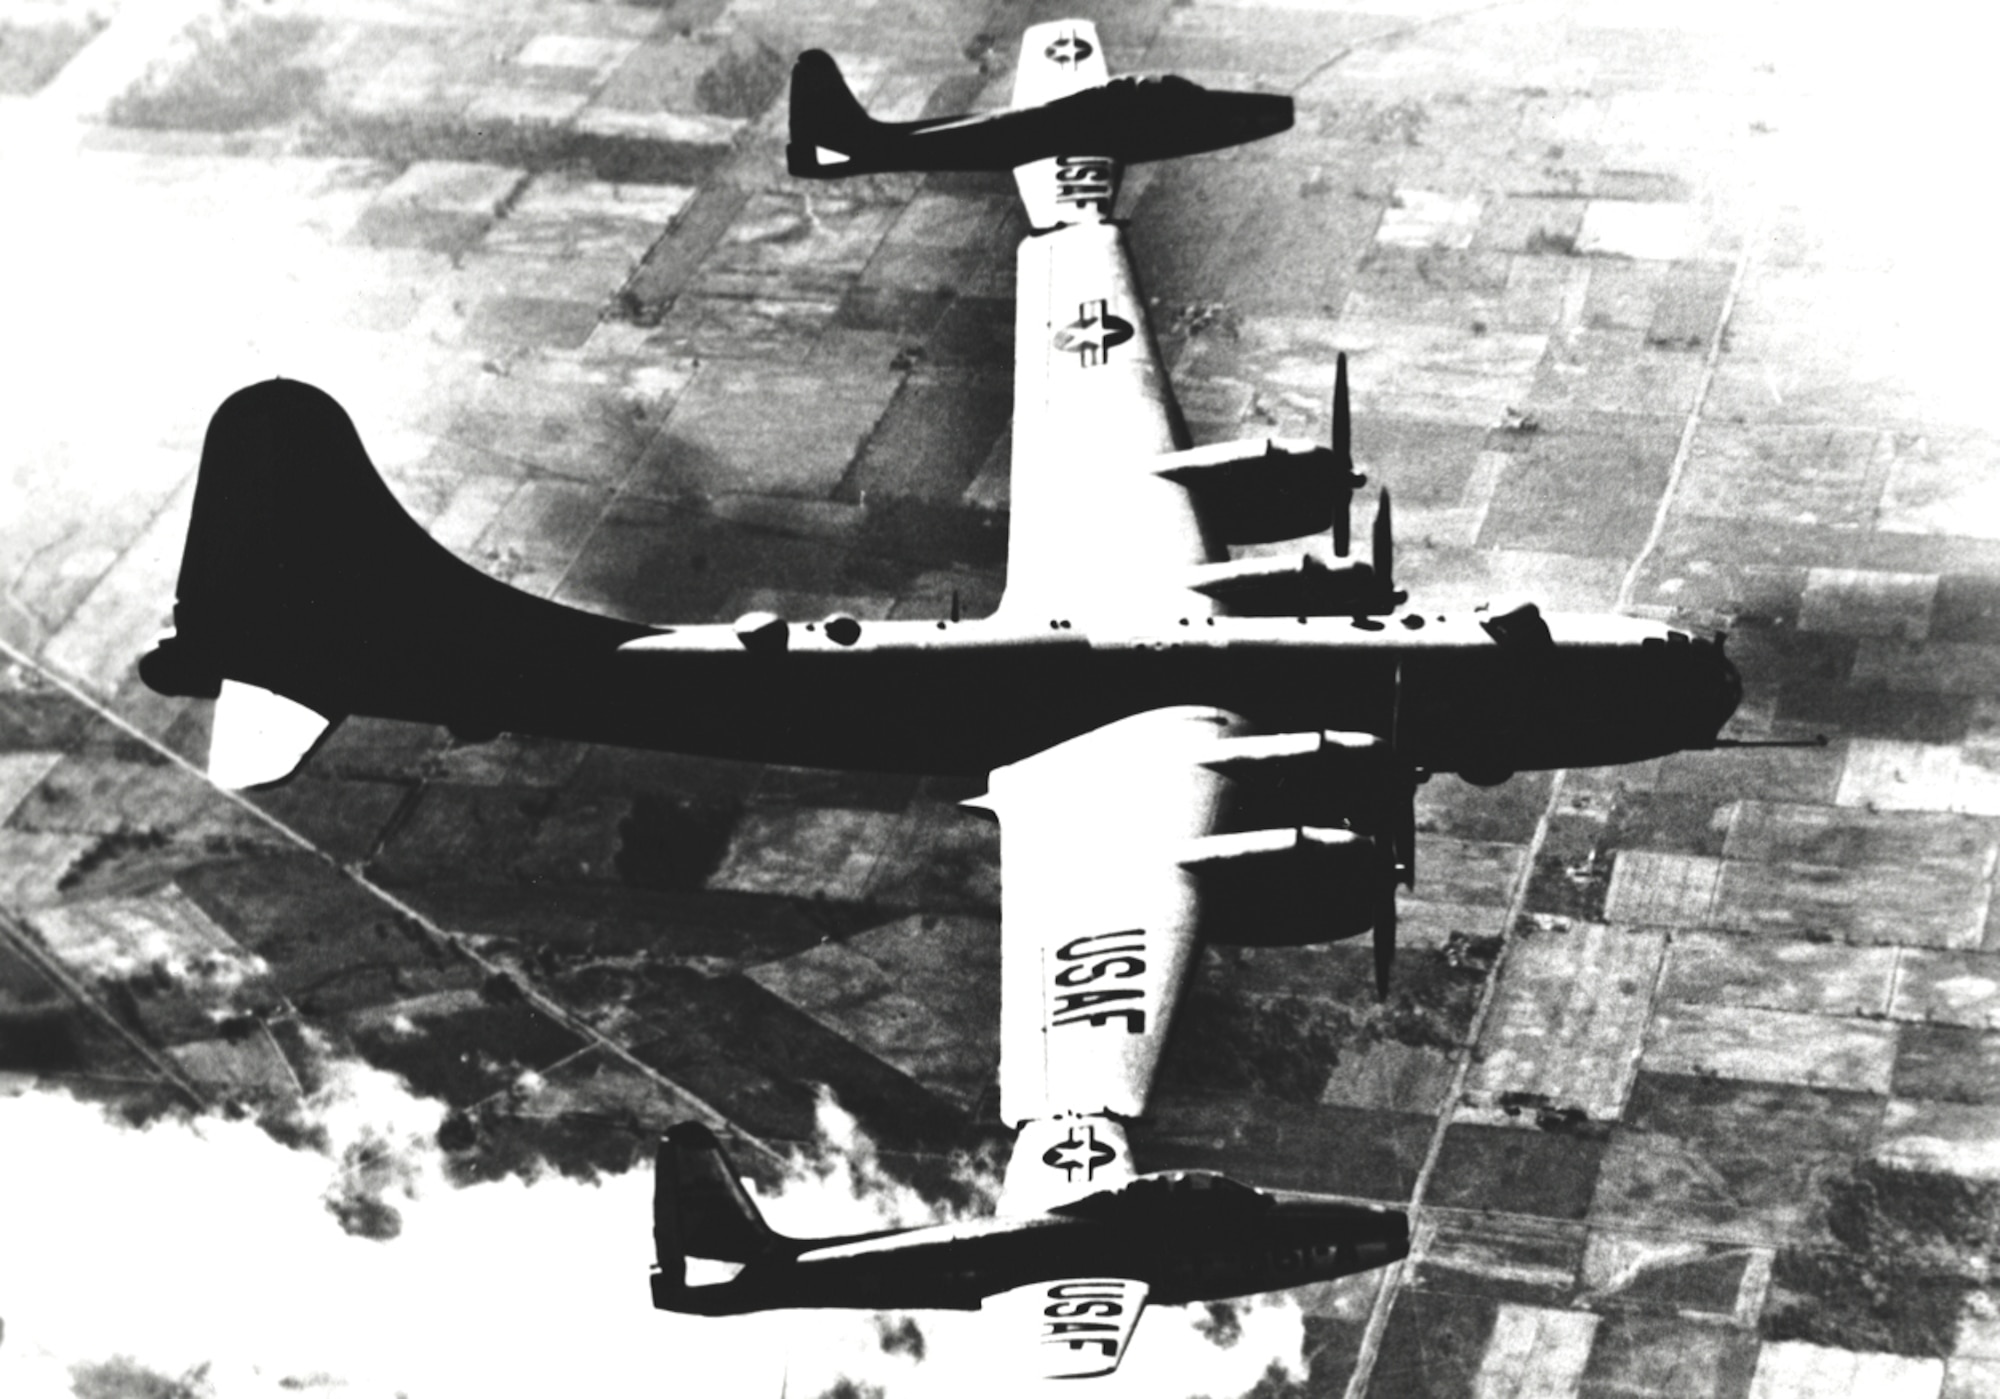 Prior to developing inflight refueling for fighter aircraft, the U.S. Air Force experimented with projects such as ?Tip-Tow,? which investigated the towing of aircraft like these two F-84s by bombers such as the B-29. (U.S. Air Force historical photo)